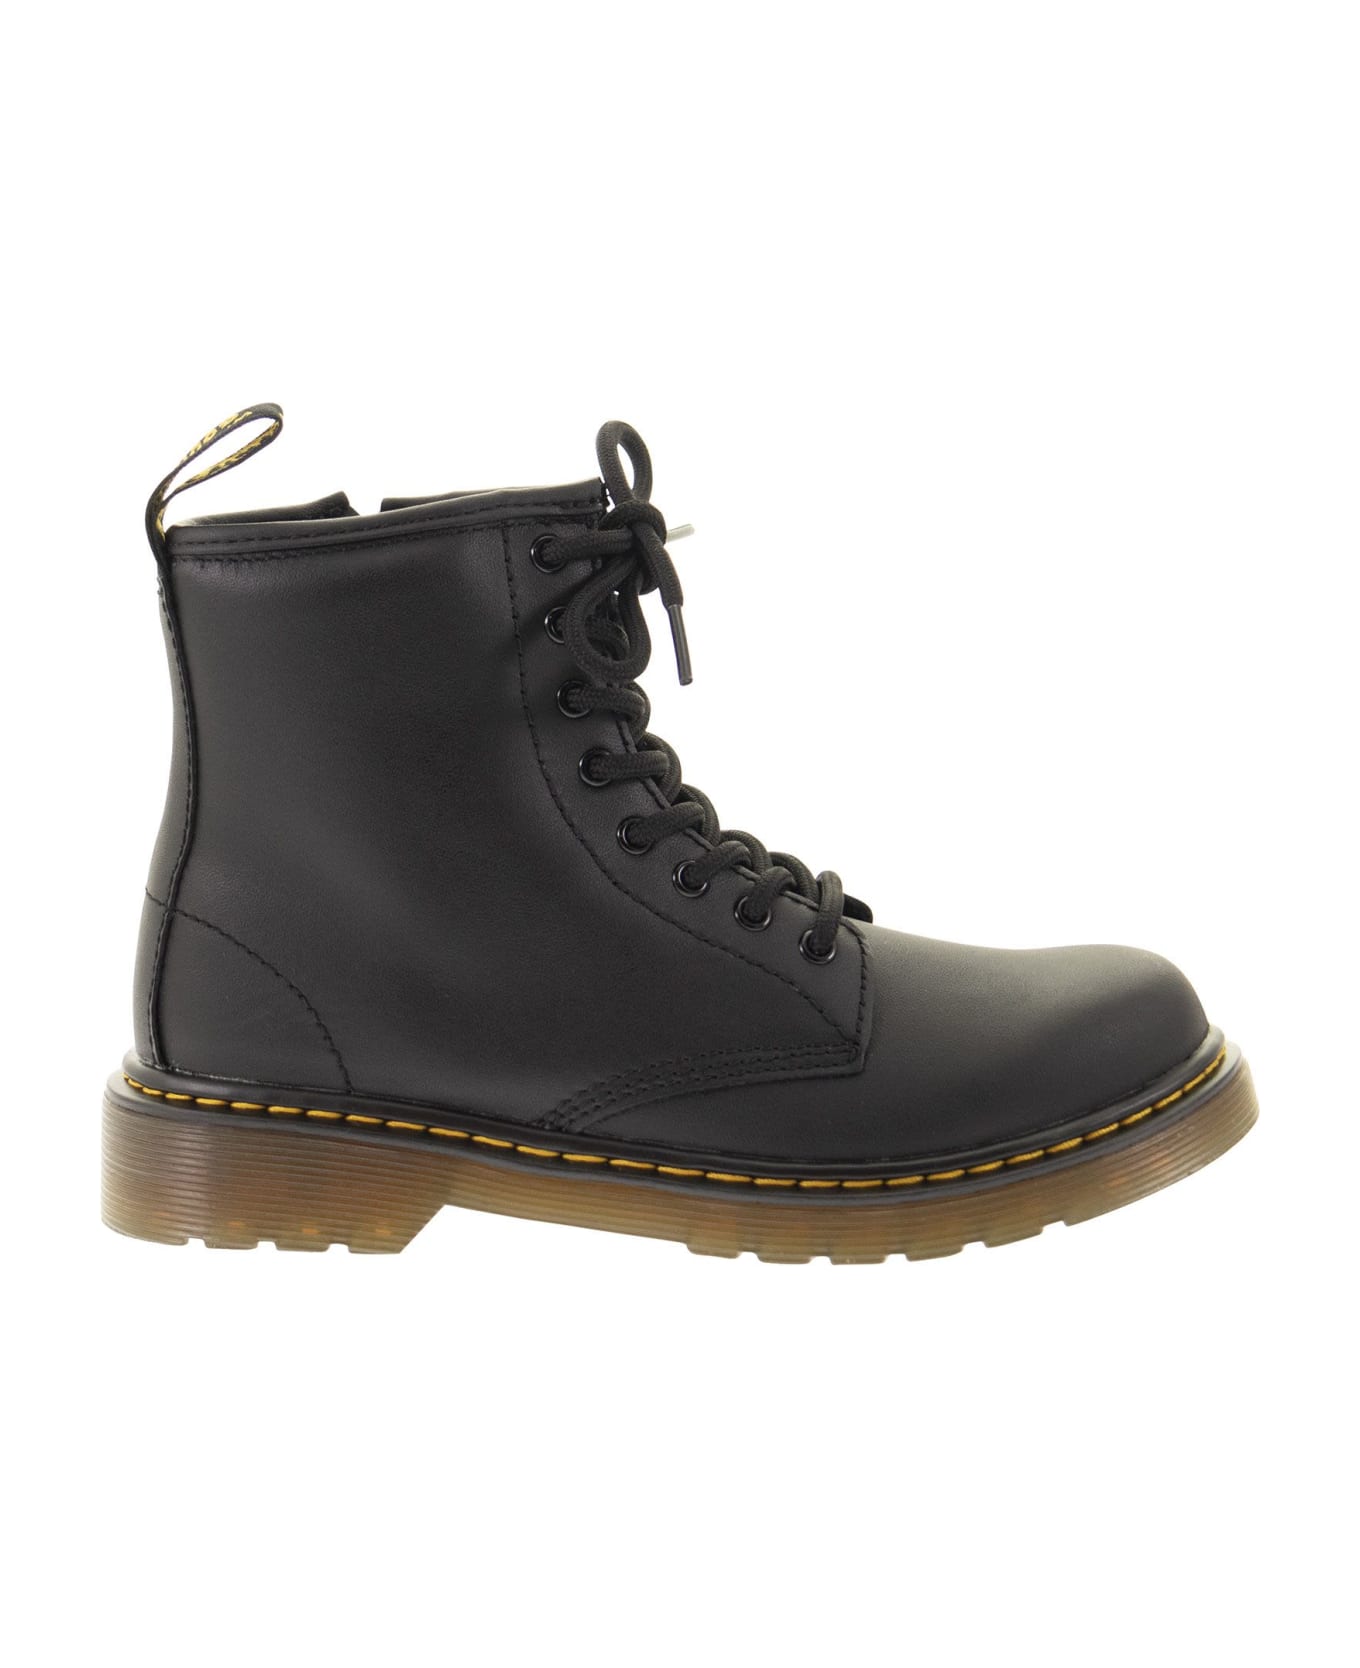 Dr. Martens 8-eye Leather Ankle Boot 1460 - Black シューズ